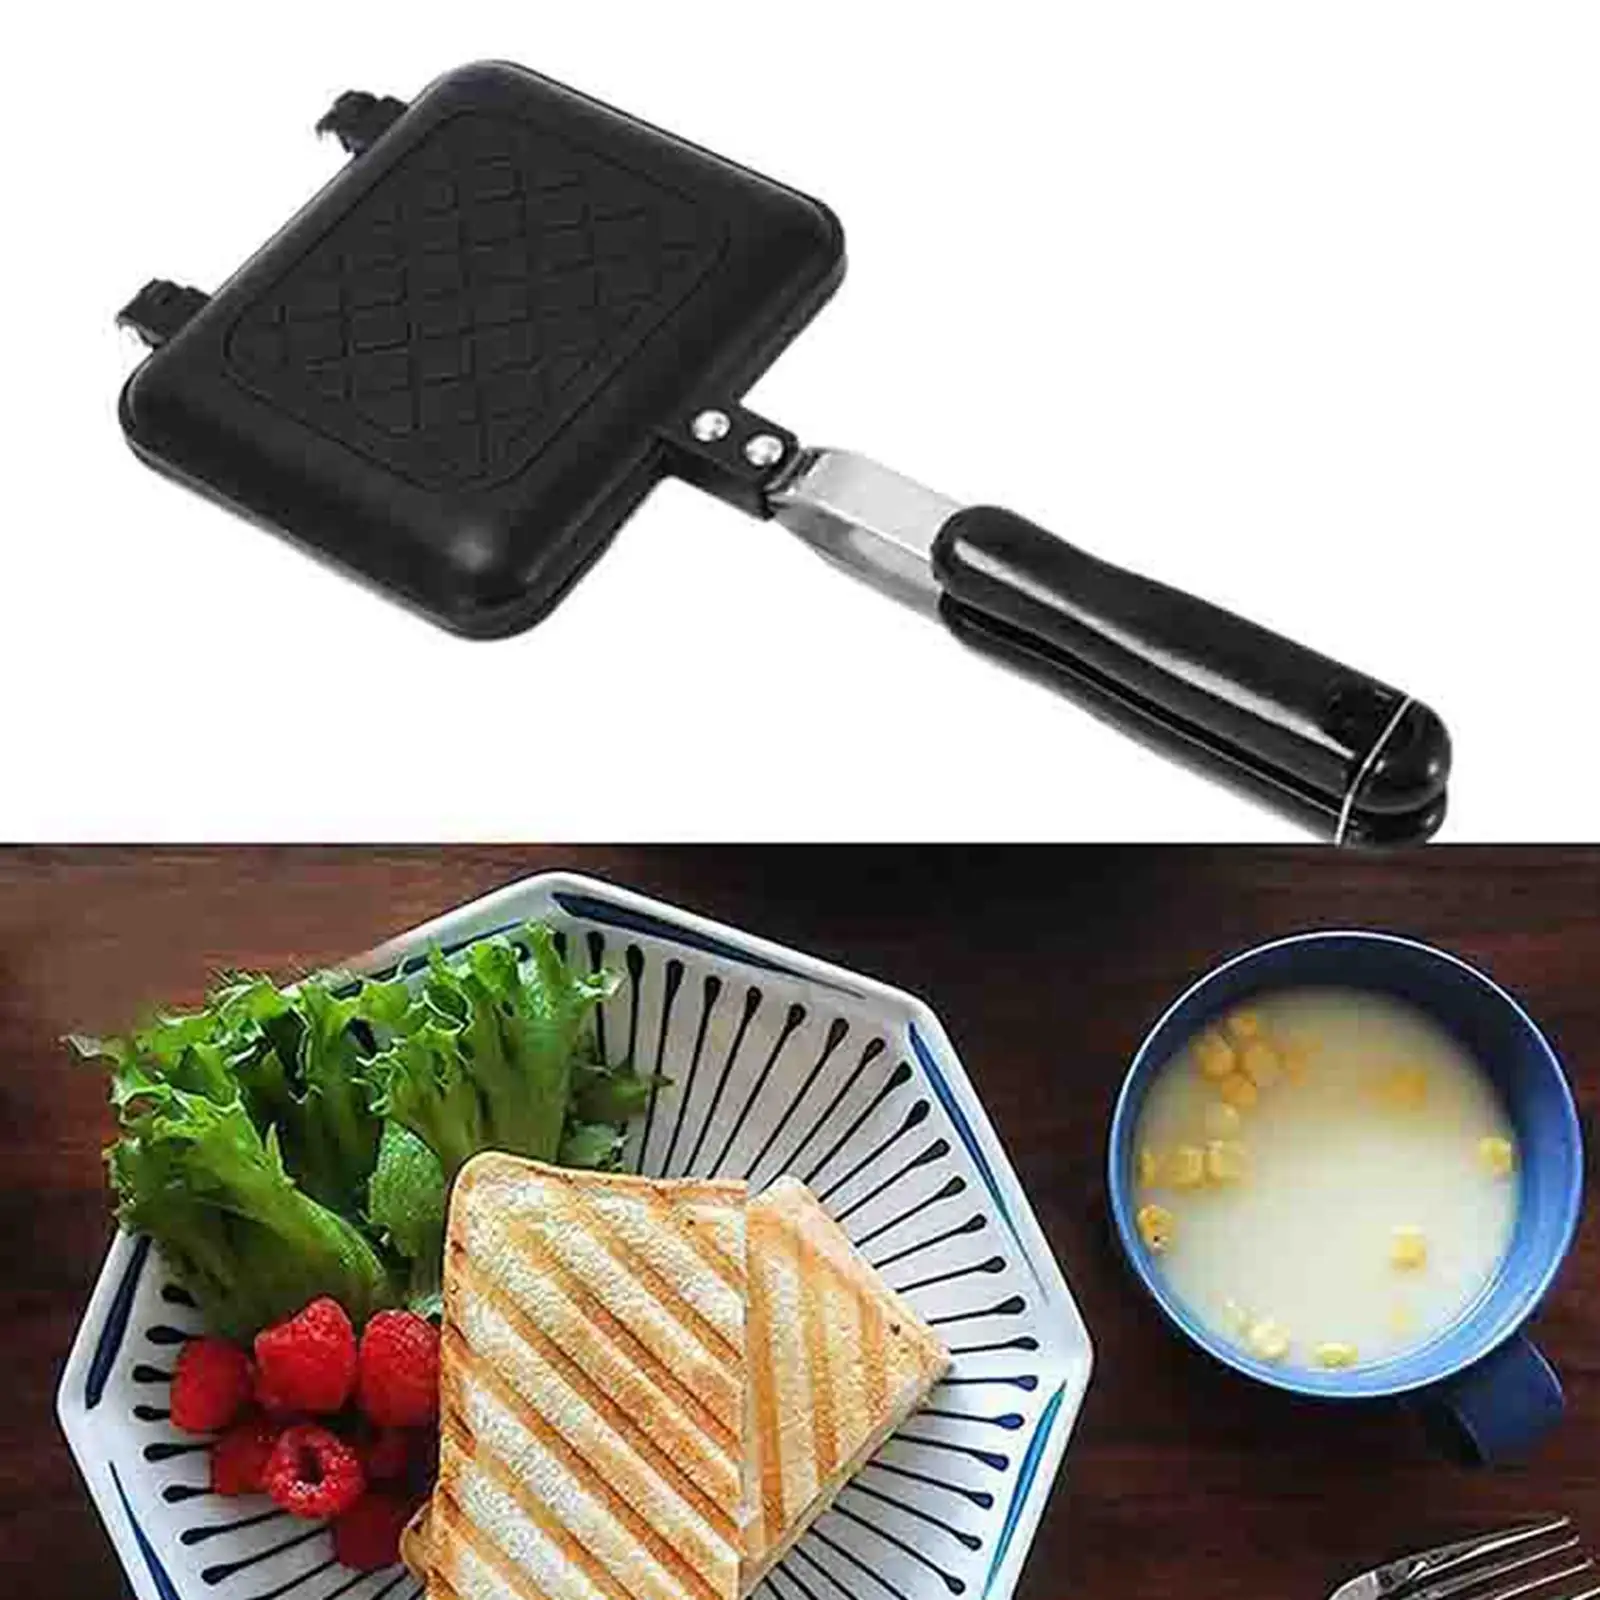 Double Sided Heating Cooking Pan Waffle Cake Maker Pan Egg Pan for Gas Stove